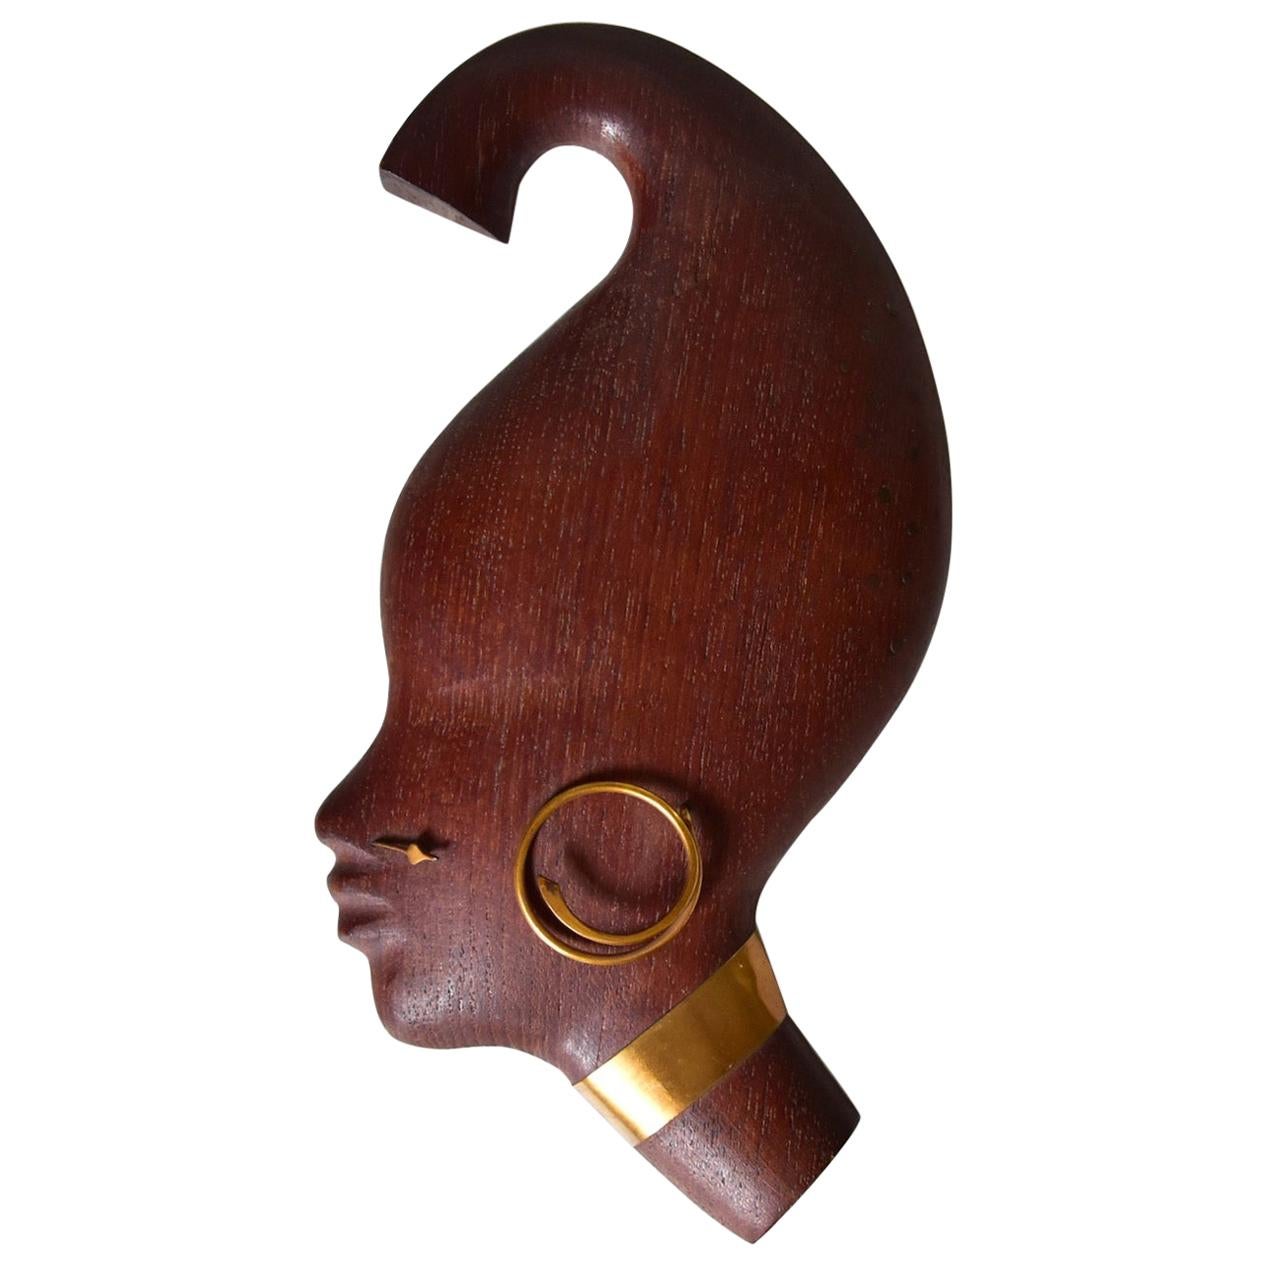 Rare Tico Teak 1950s African Nubian Wall Decoration Made in Denmark For Sale